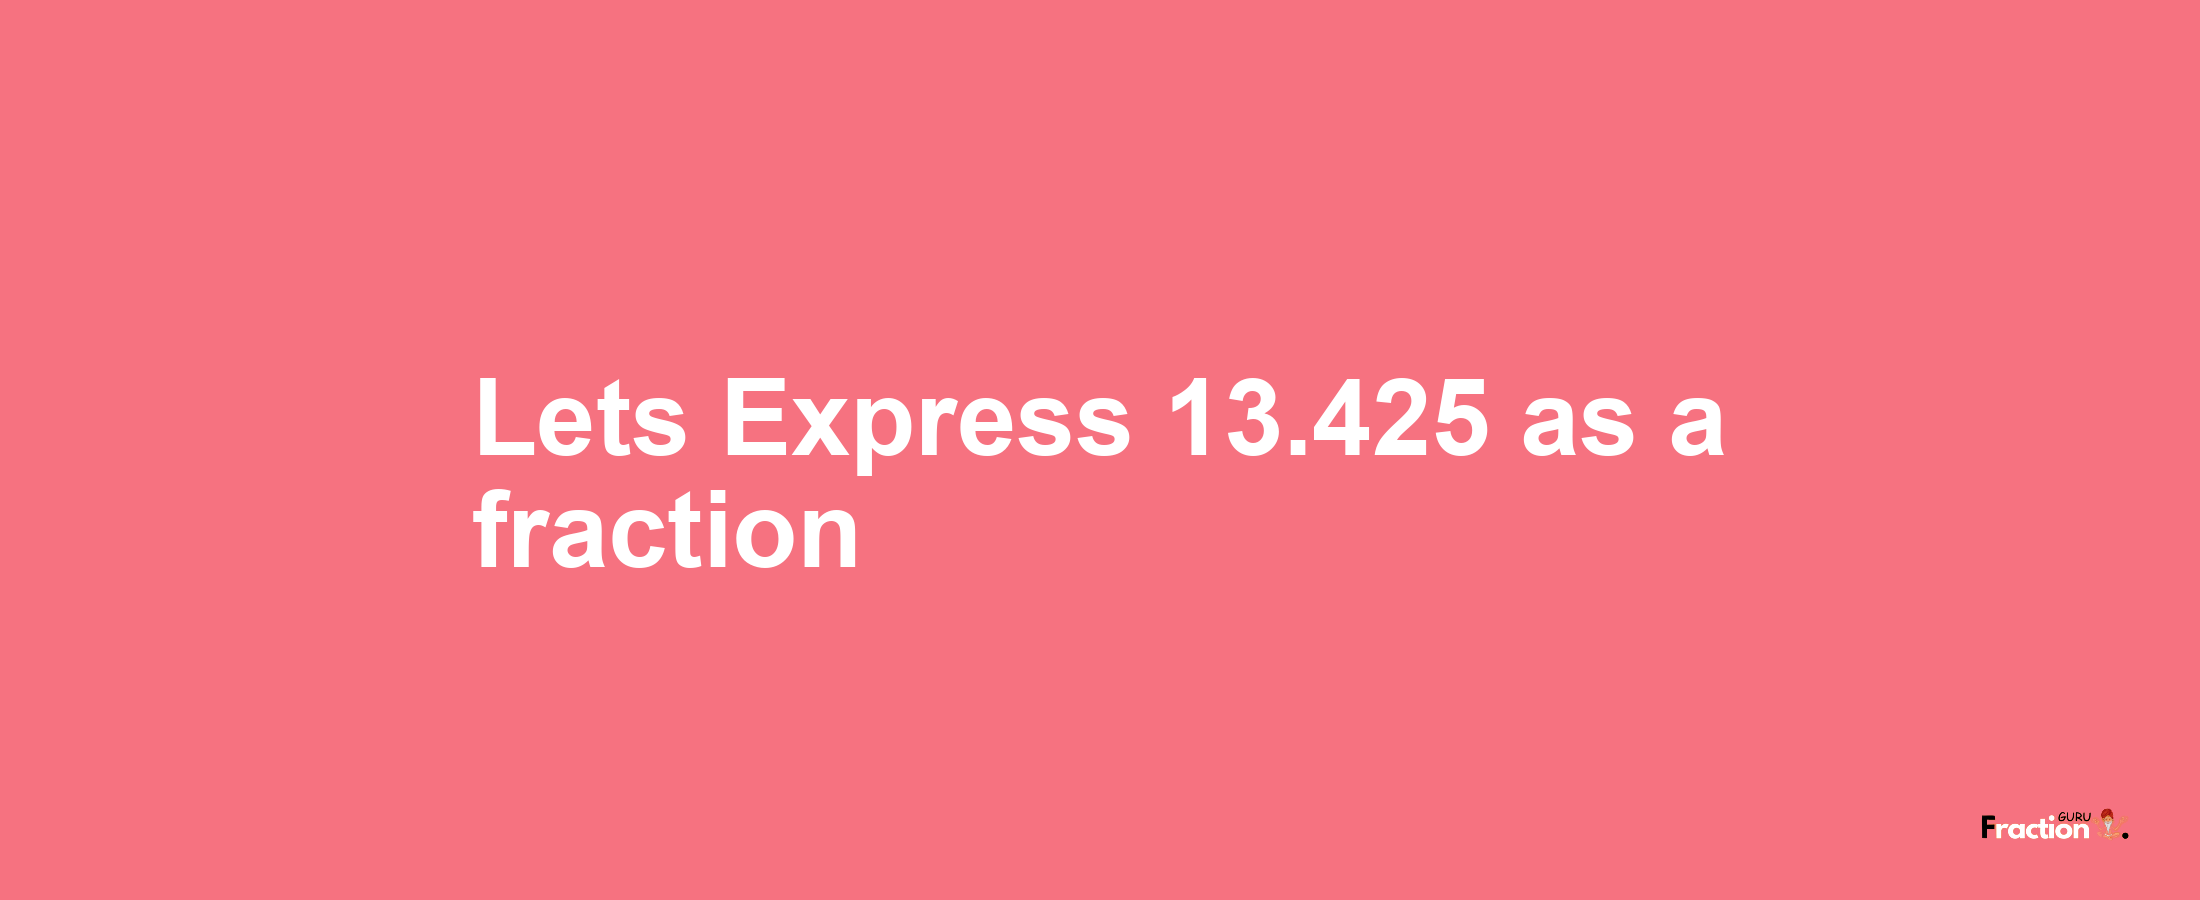 Lets Express 13.425 as afraction